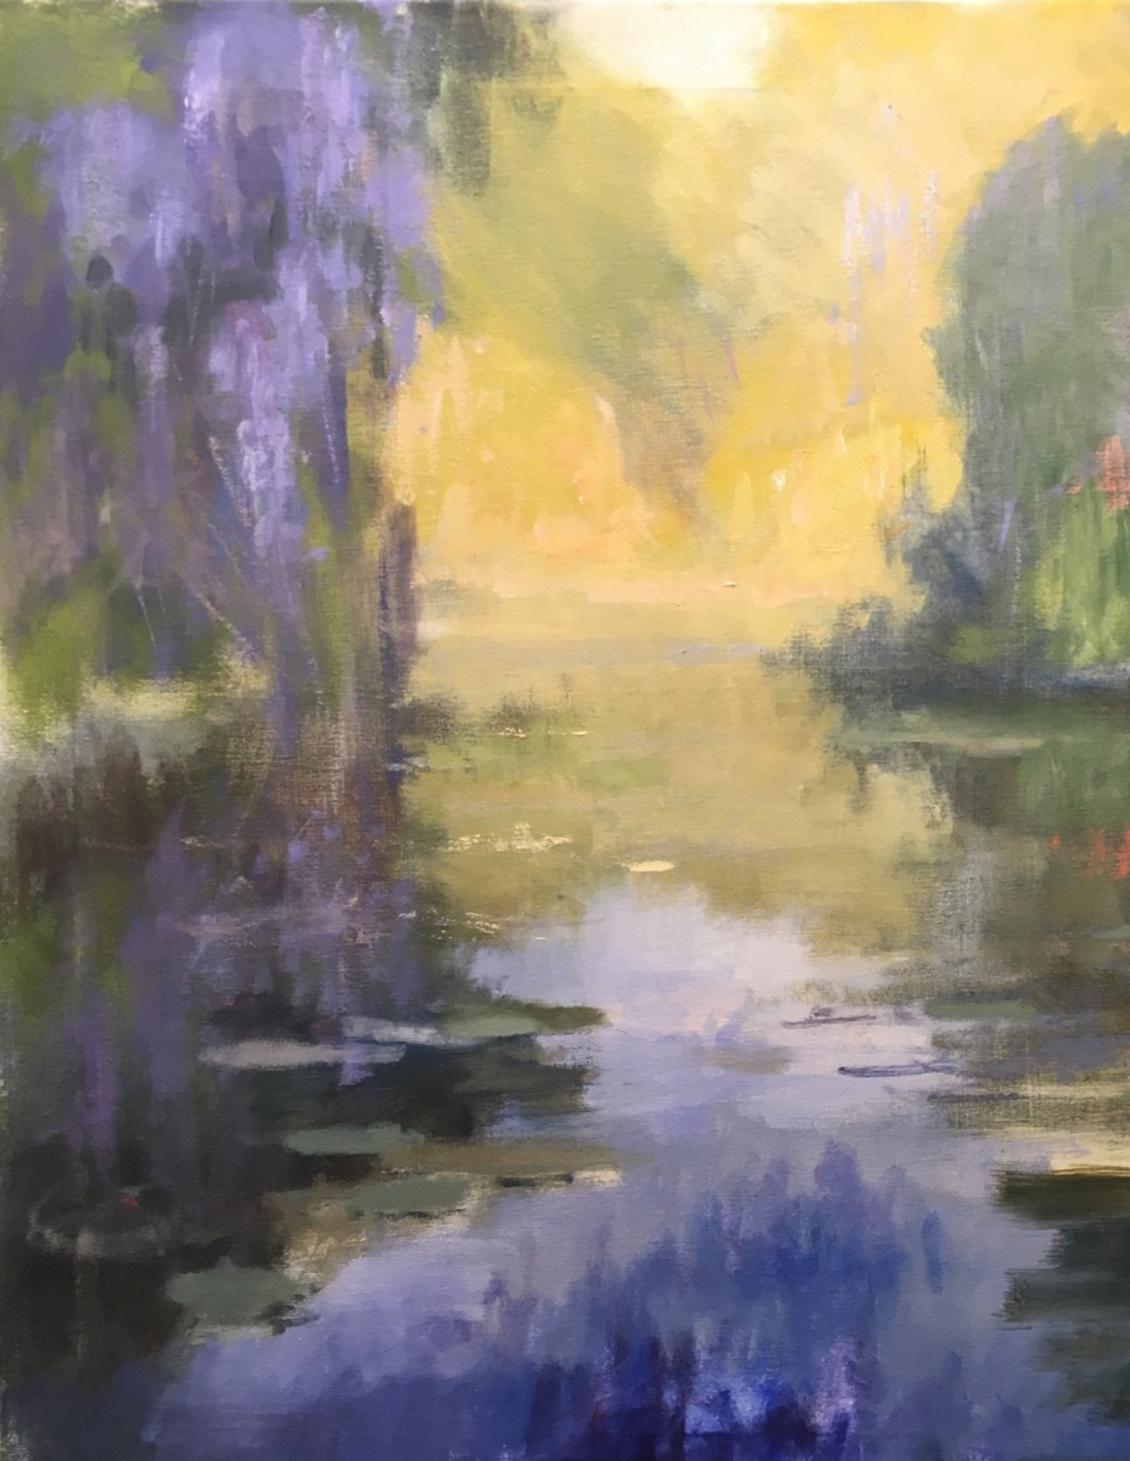 FREE SHIPPING
Wisteria is contemporary oil landscape painting on canvas 24 x 24 painted in 2020 by Texan artist Steve Parker . Steve Parker conveys his understanding of  Texas landscapes and the use of native trees. Wisteria is a painting from a